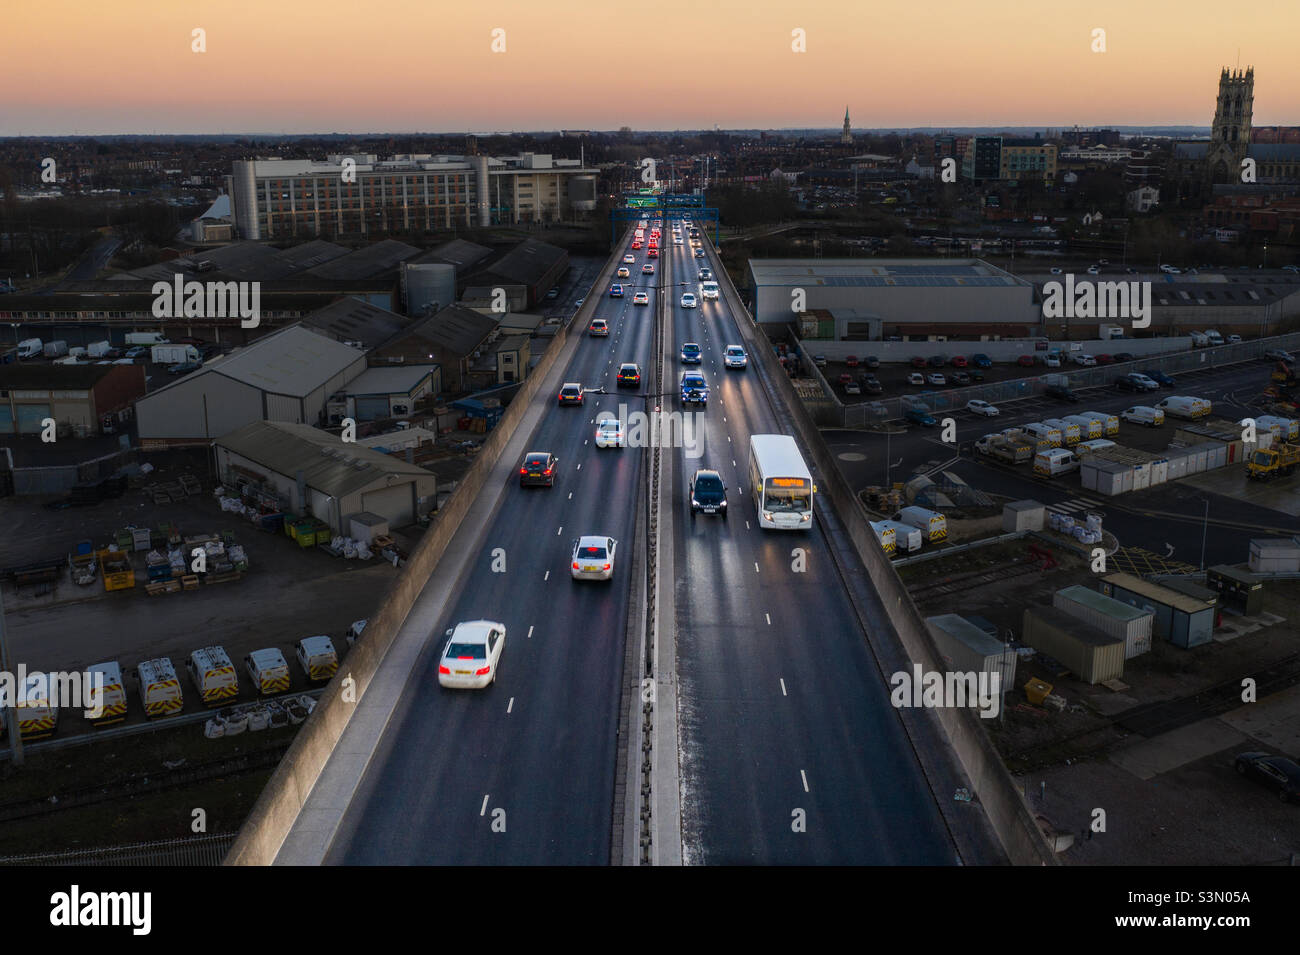 Aerial view of a busy city dual carriageway or highway overpass at night Stock Photo